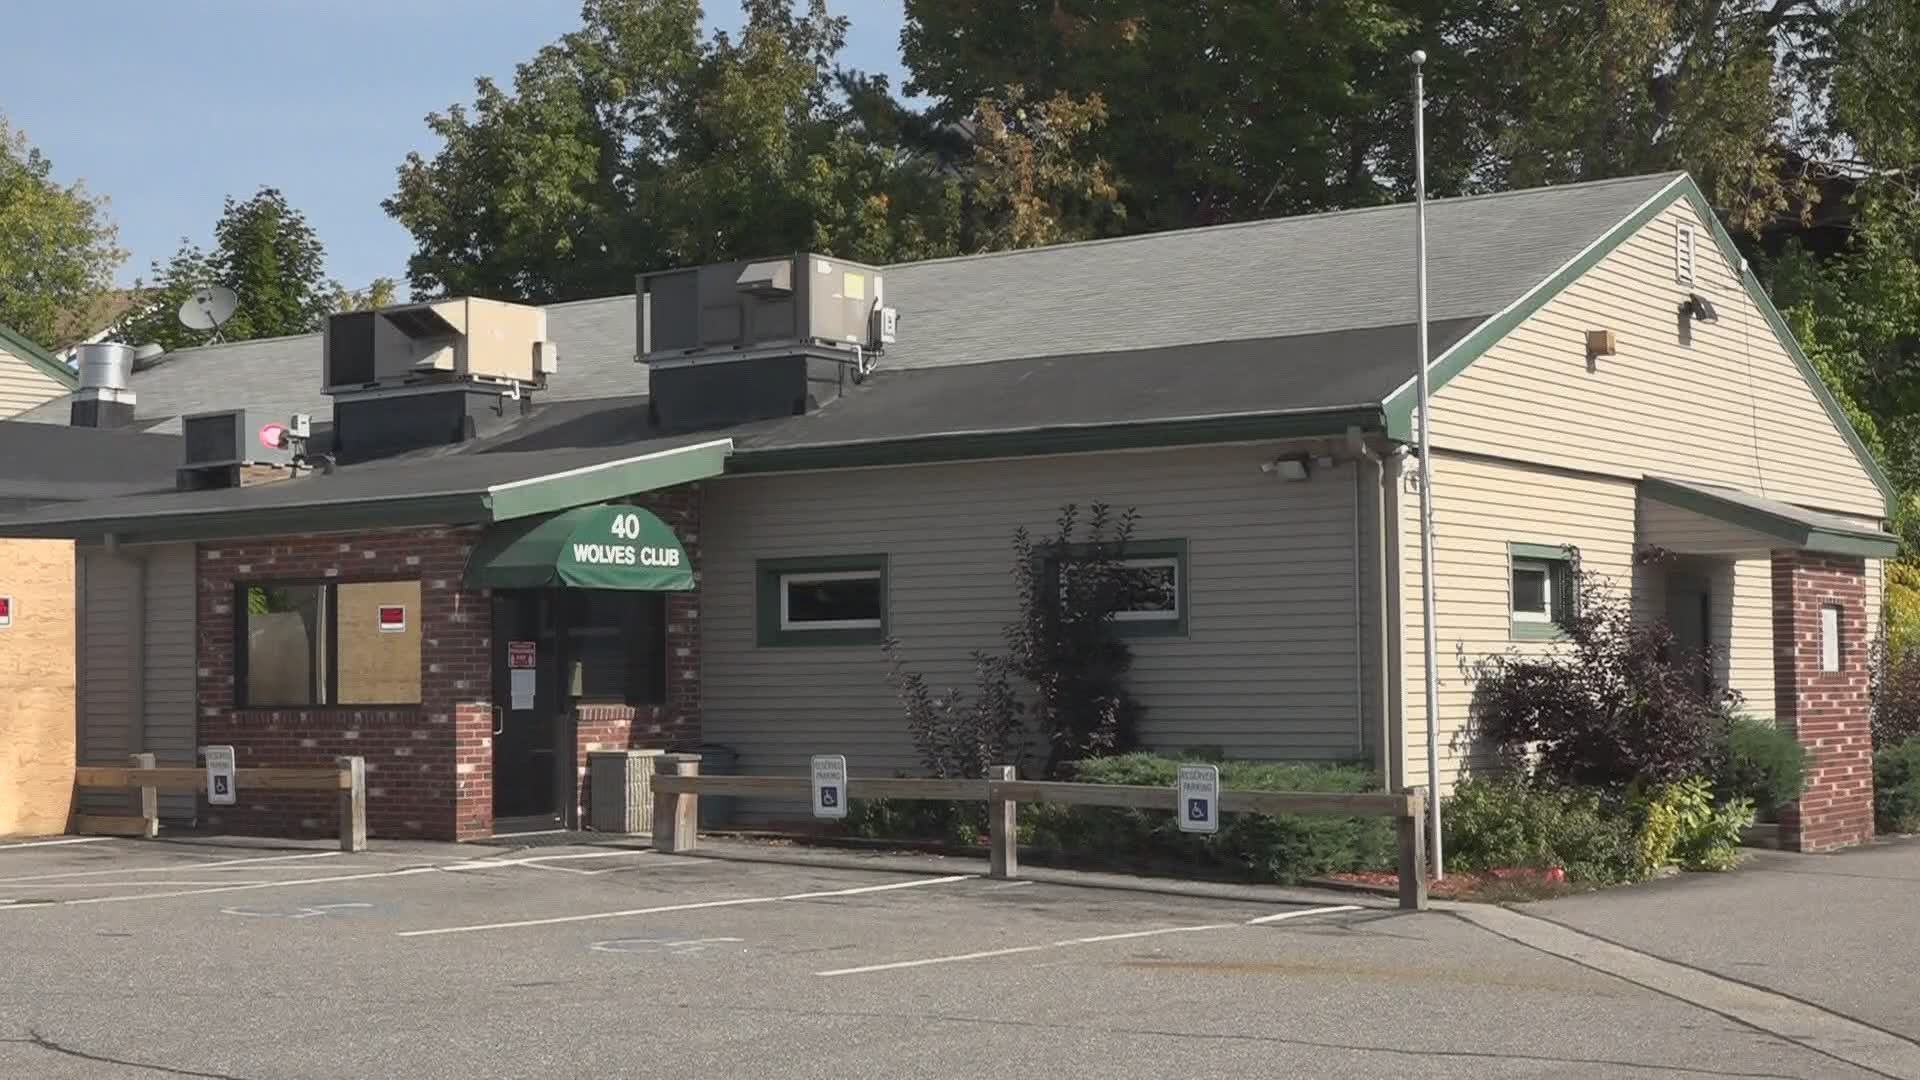 'They didn't contract it here': Sanford social club frustrated about Maine CDC outbreak investigation